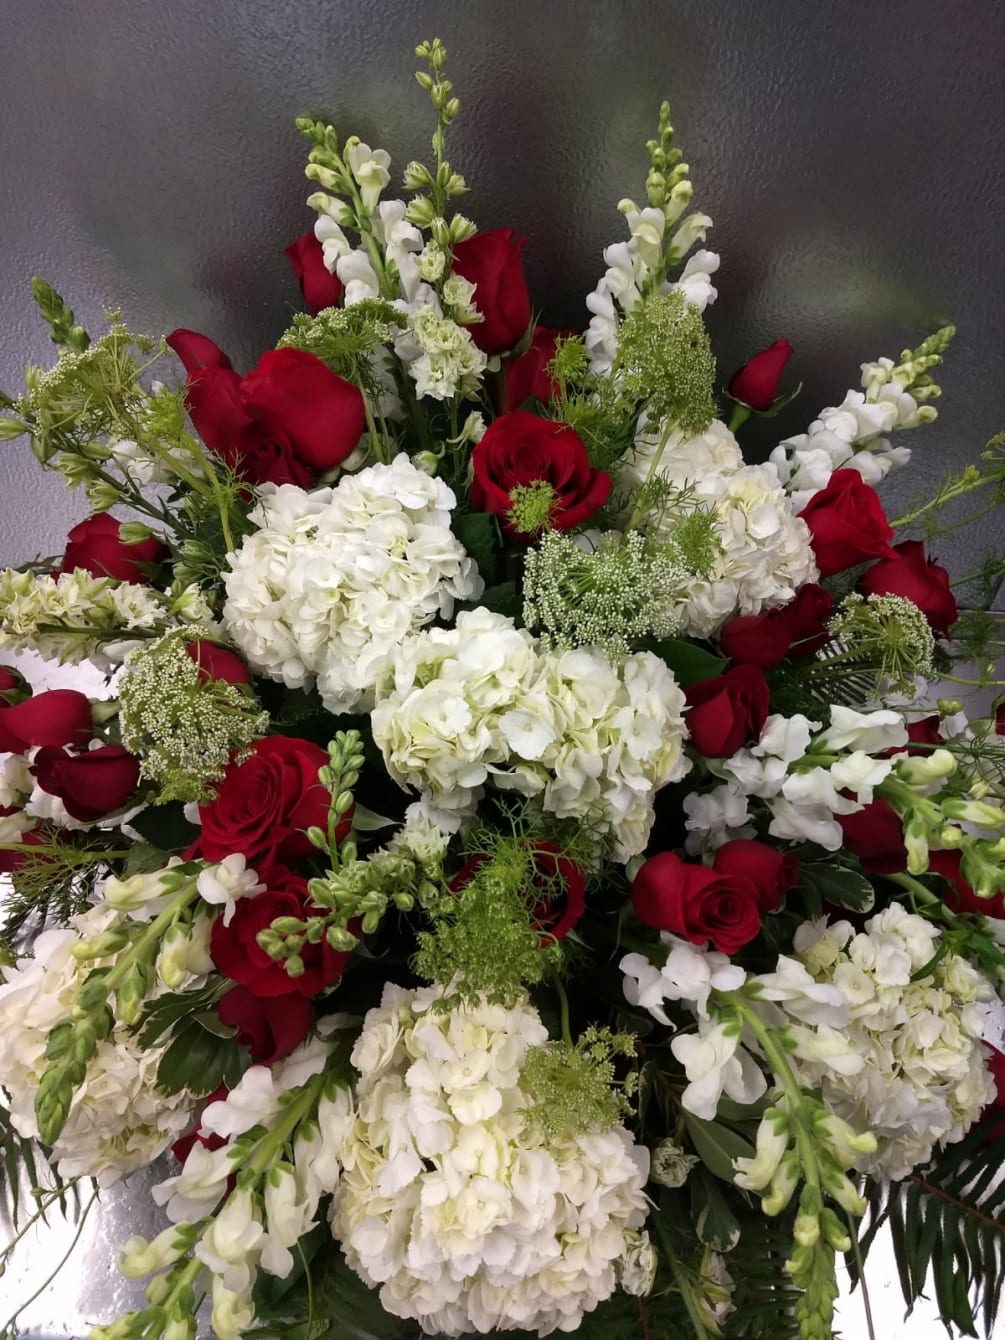 Sincerity Casket Spray is a wondrous presentation of fresh color and beauty.